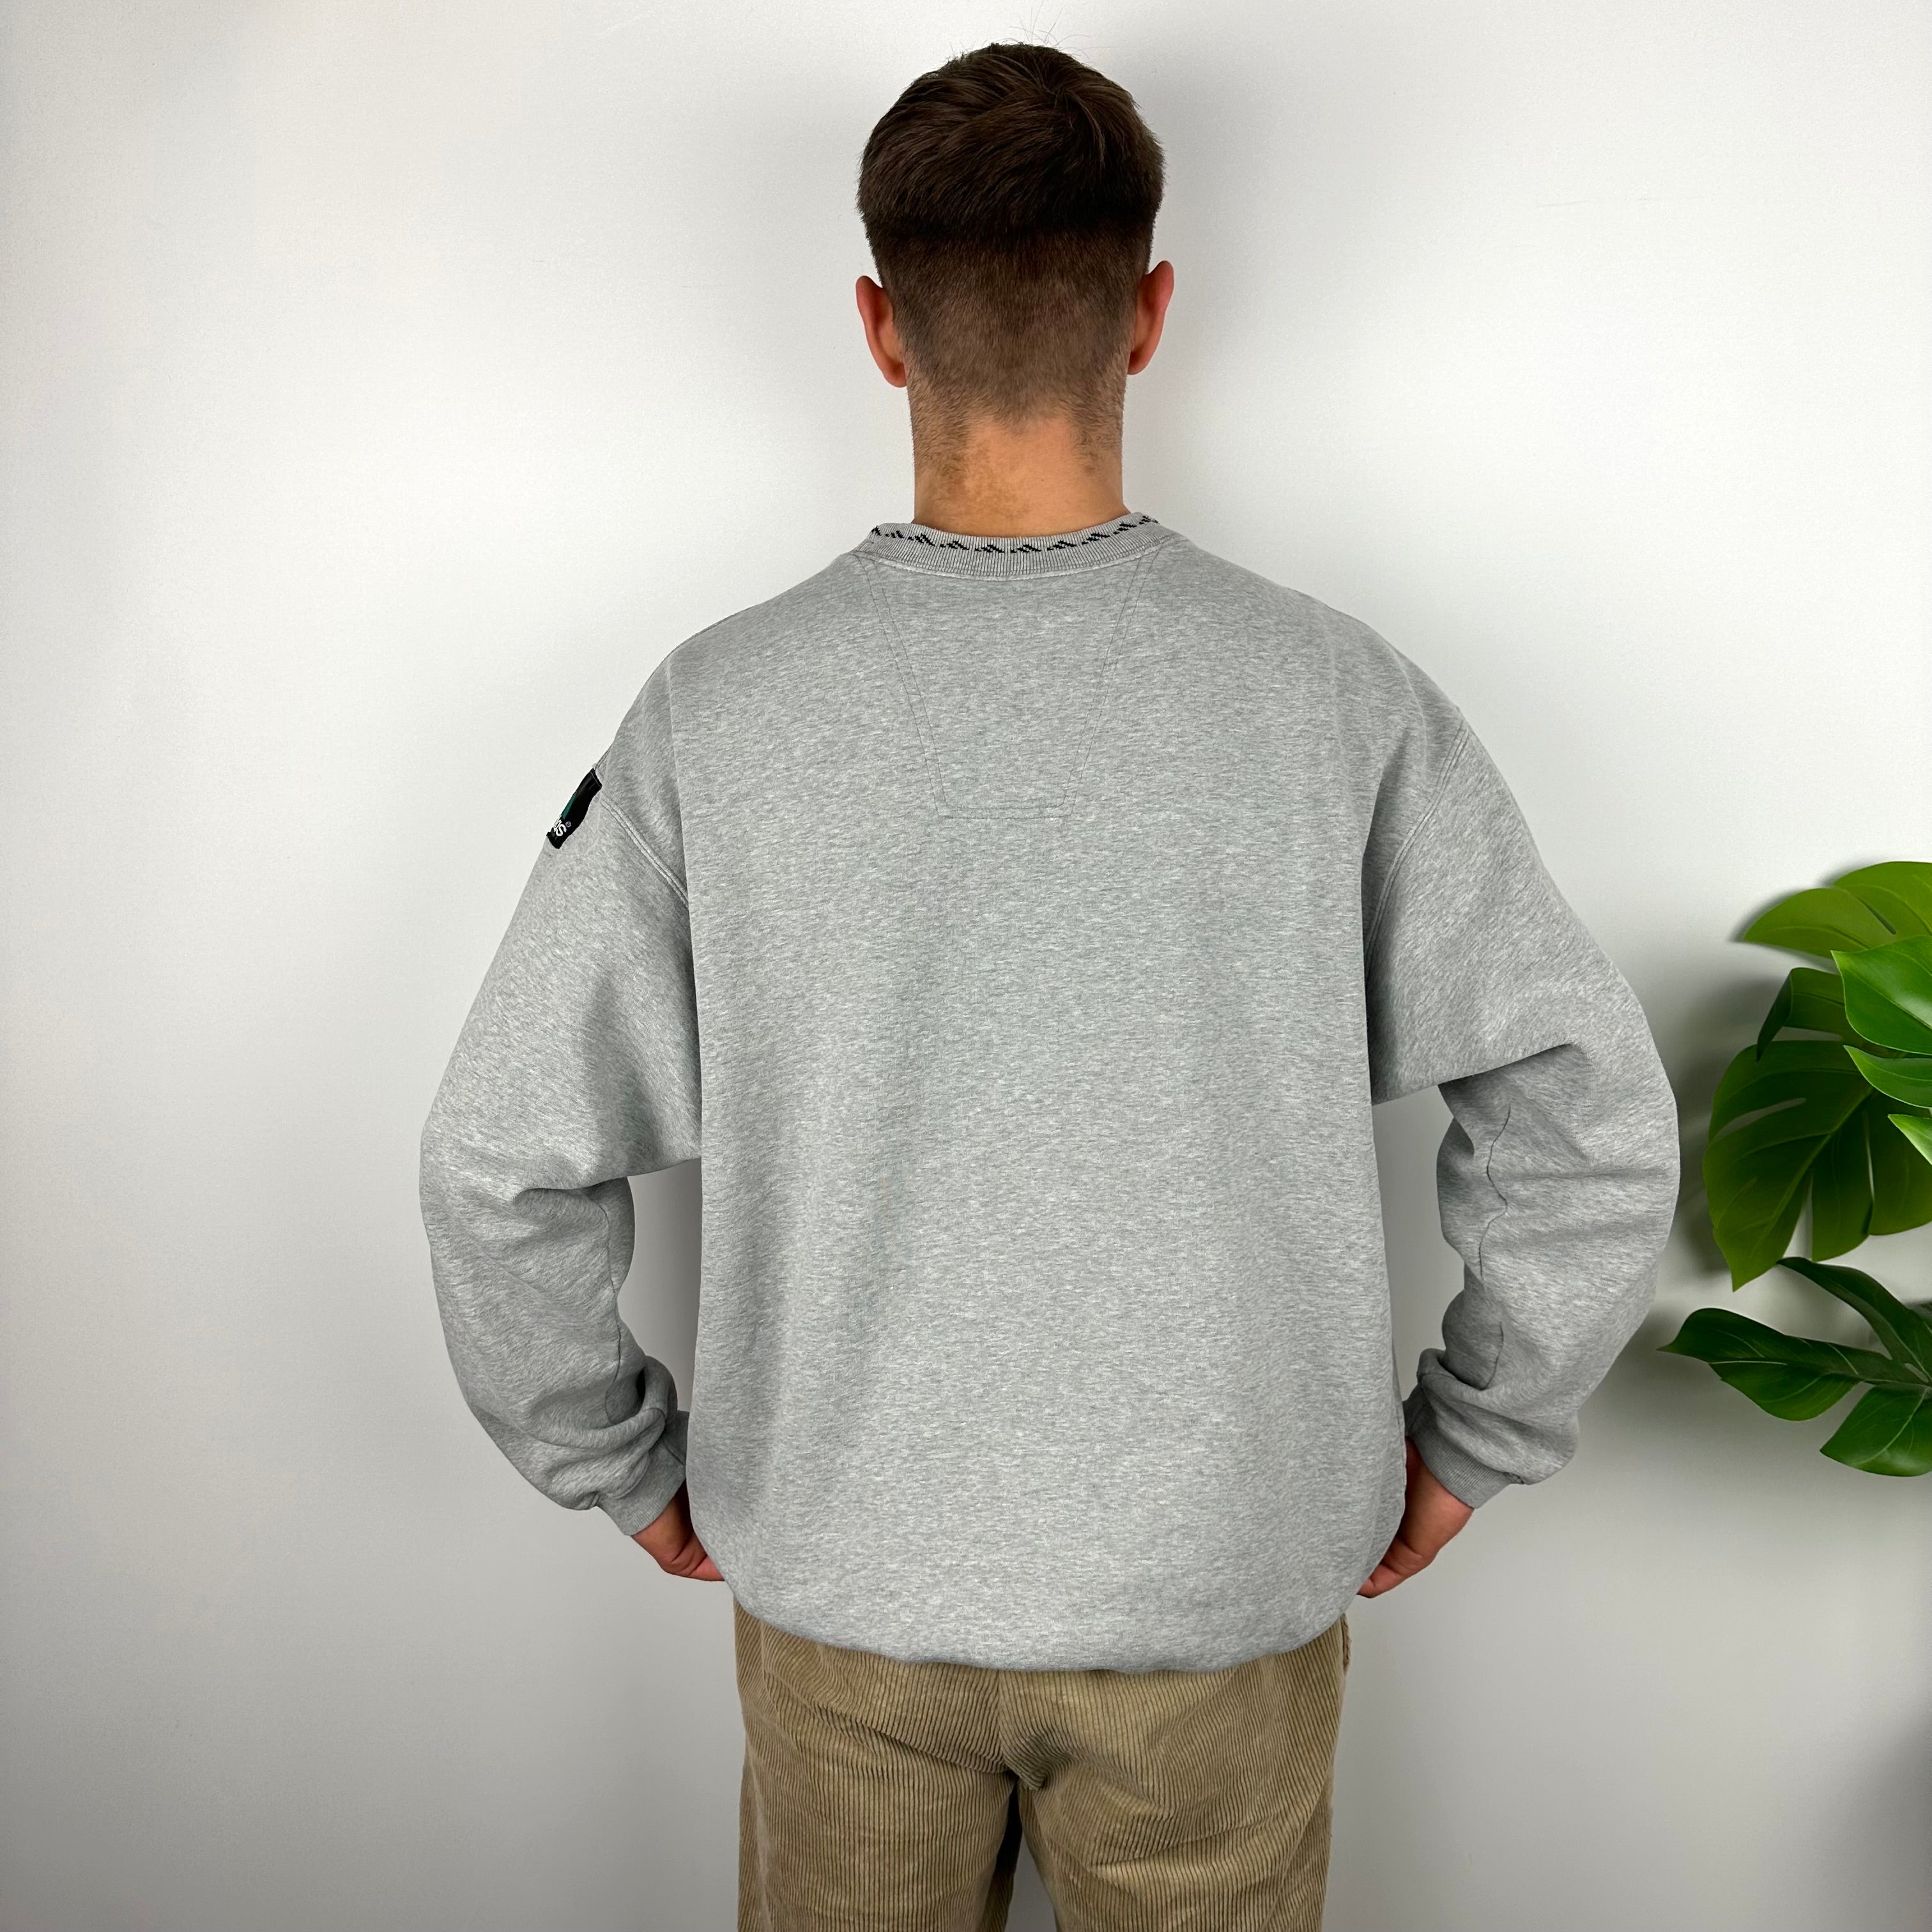 Adidas Equipment RARE Grey Embroidered Spell Out Sweatshirt (L)